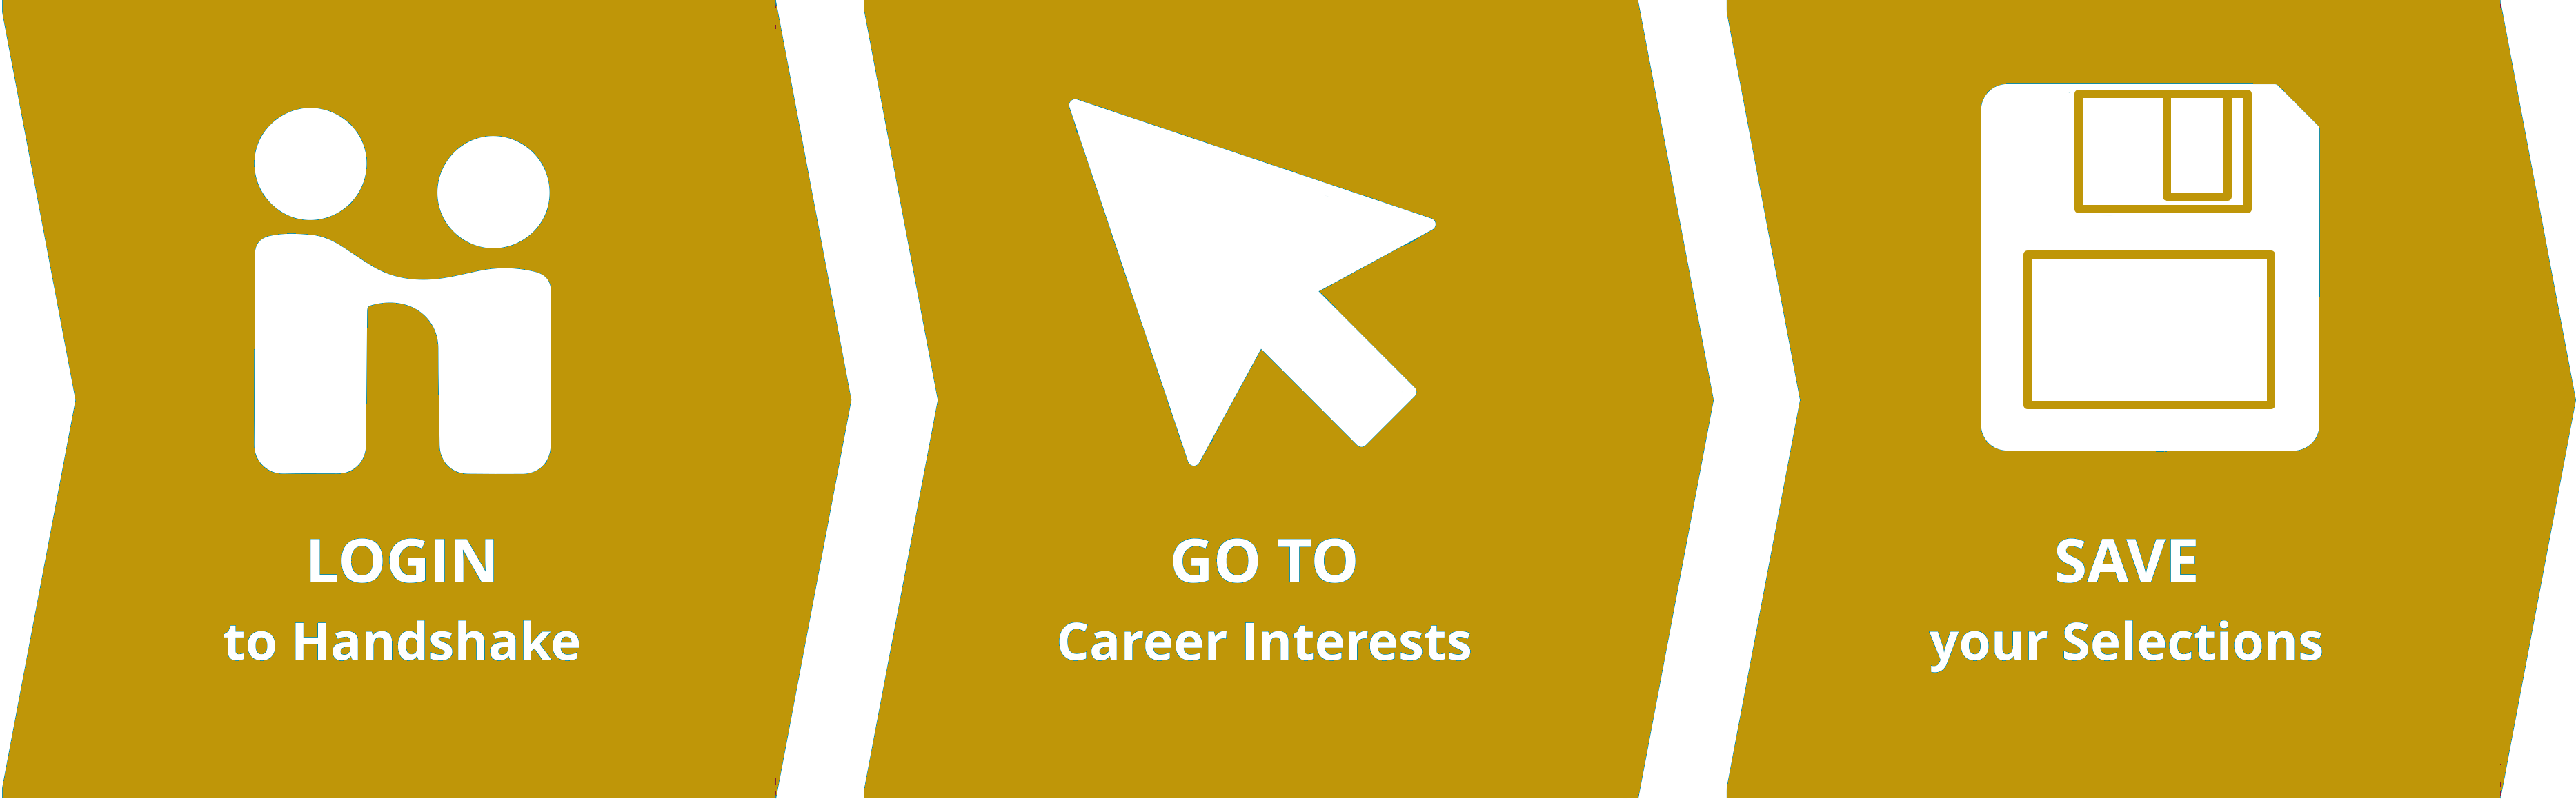 Login to Handshake, Go to Career Interests, Save Your Selections